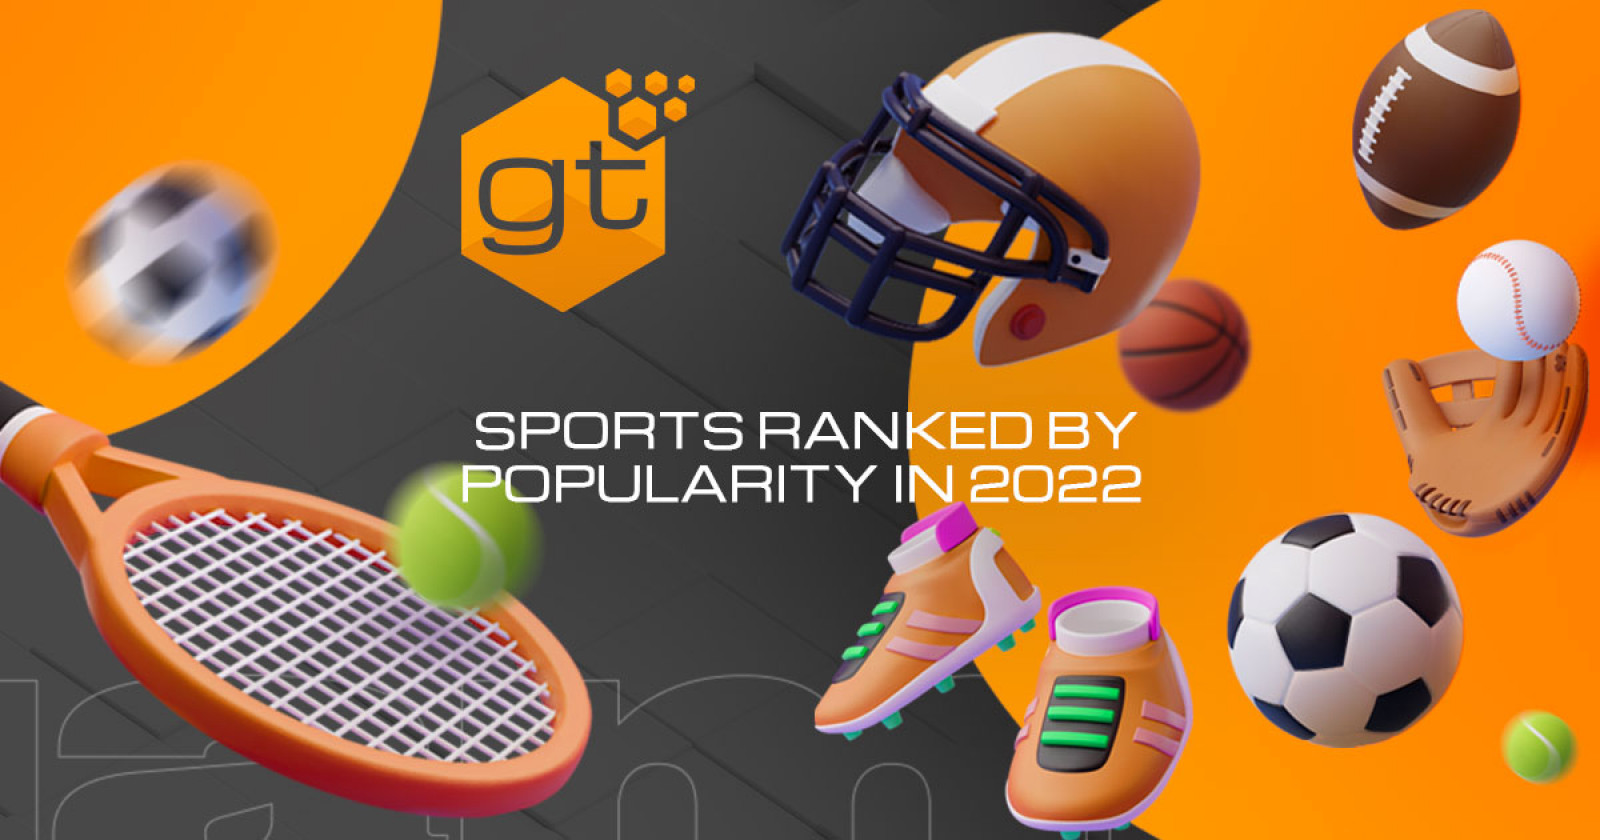 Sports popularity ranking for 2022